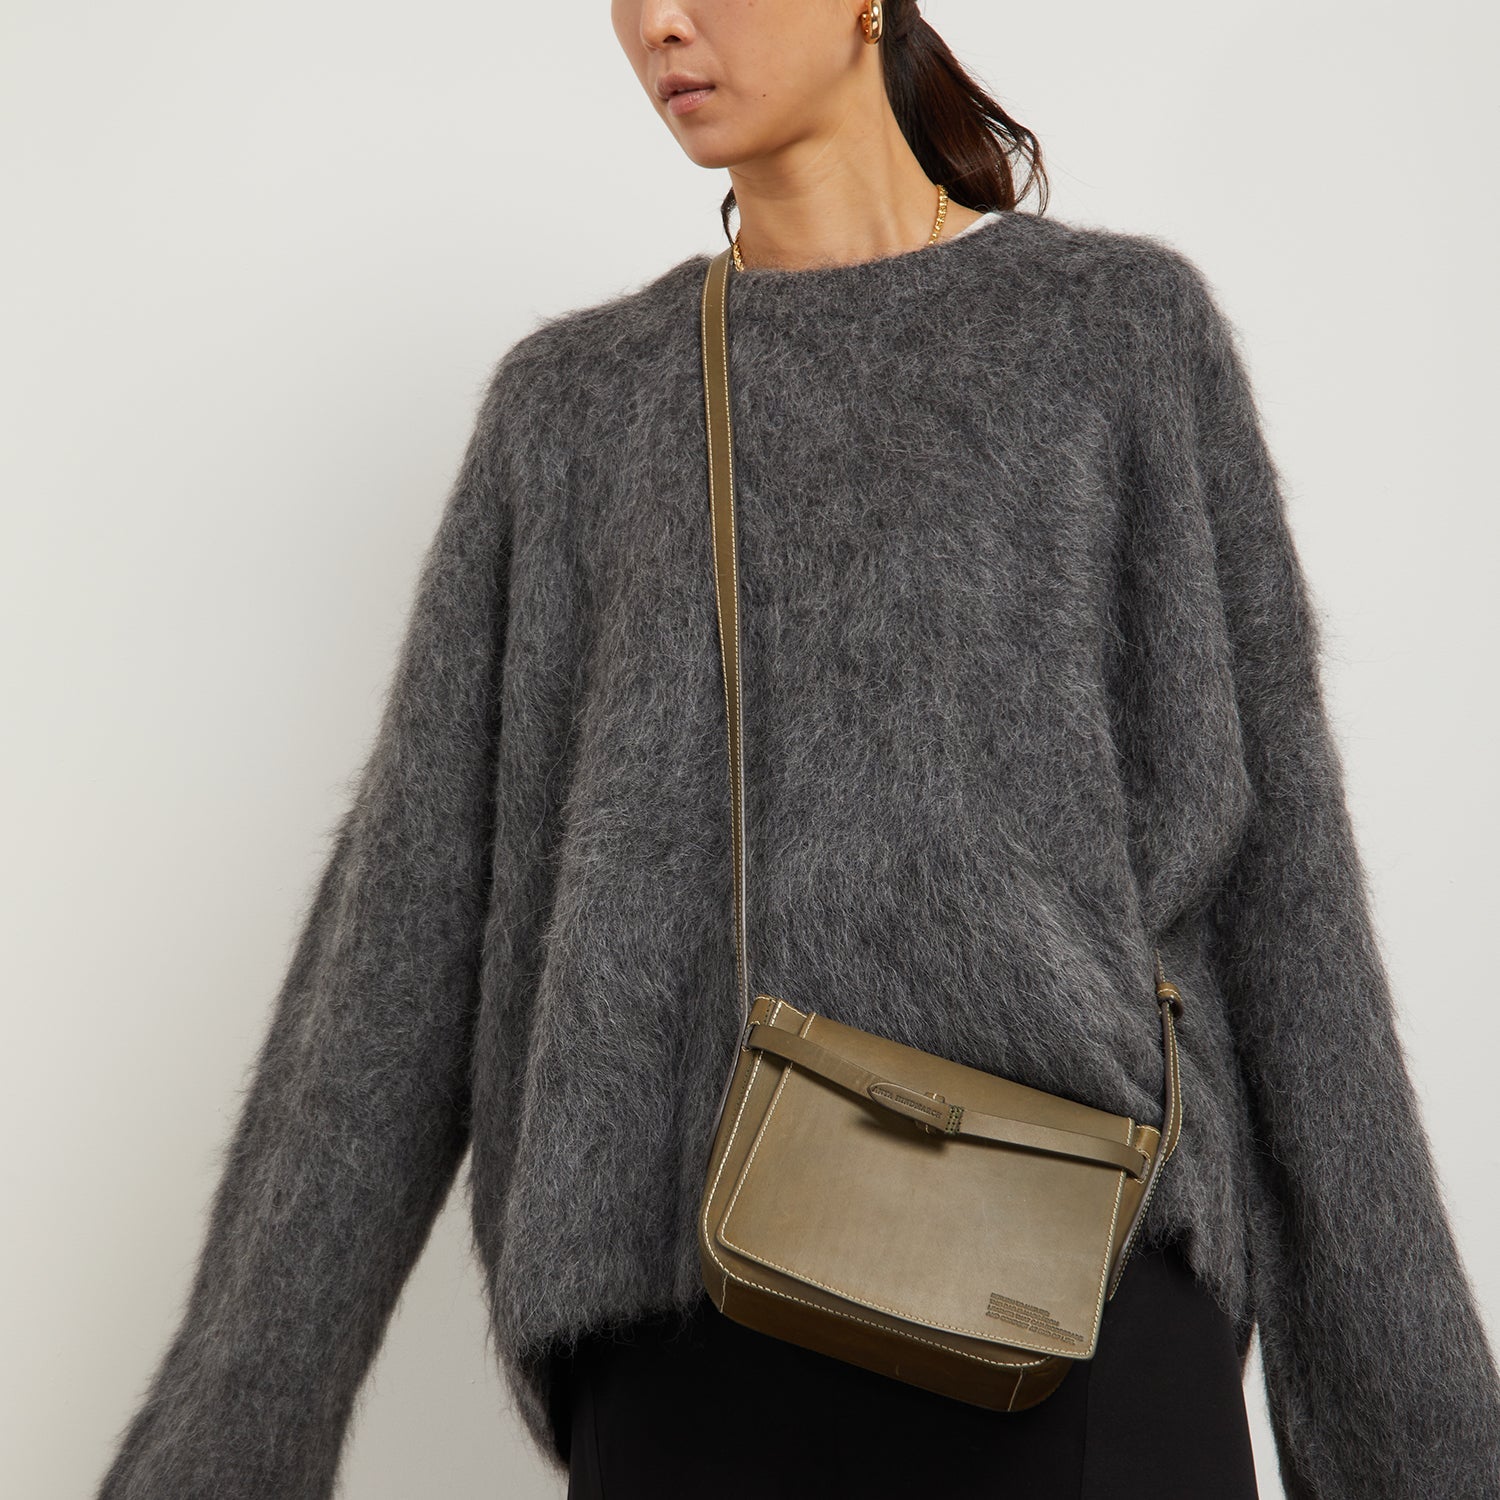 Return to Nature Cross-body -

                  
                    Compostable Leather in Fern -
                  

                  Anya Hindmarch US
